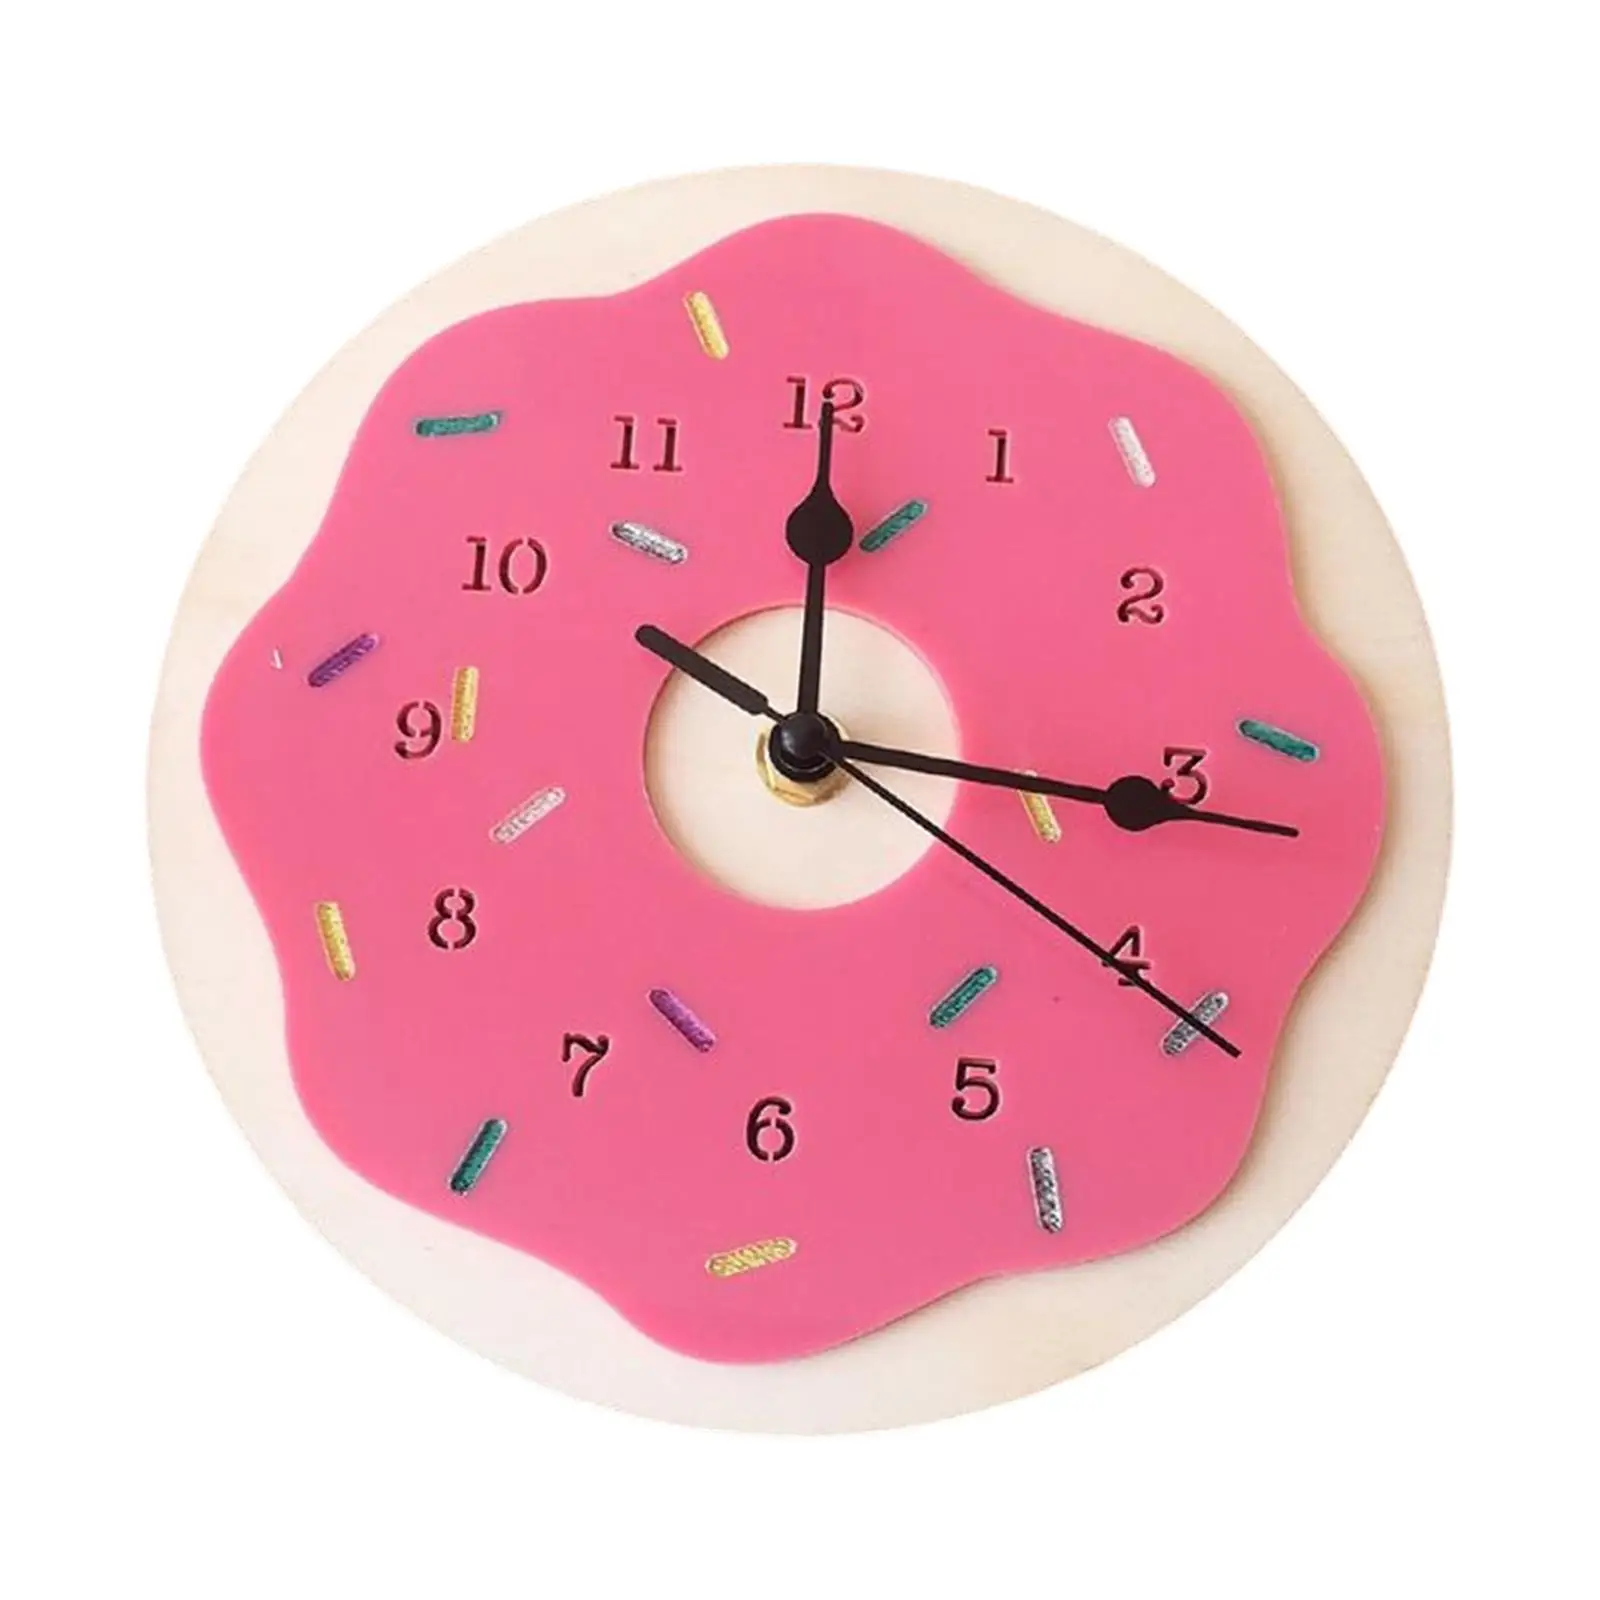 Nordic Wall Clock Non Ticking Ornament Wooden Photo Props Gift Crafts for Kids Nursery Room Decoration Living Room Shop